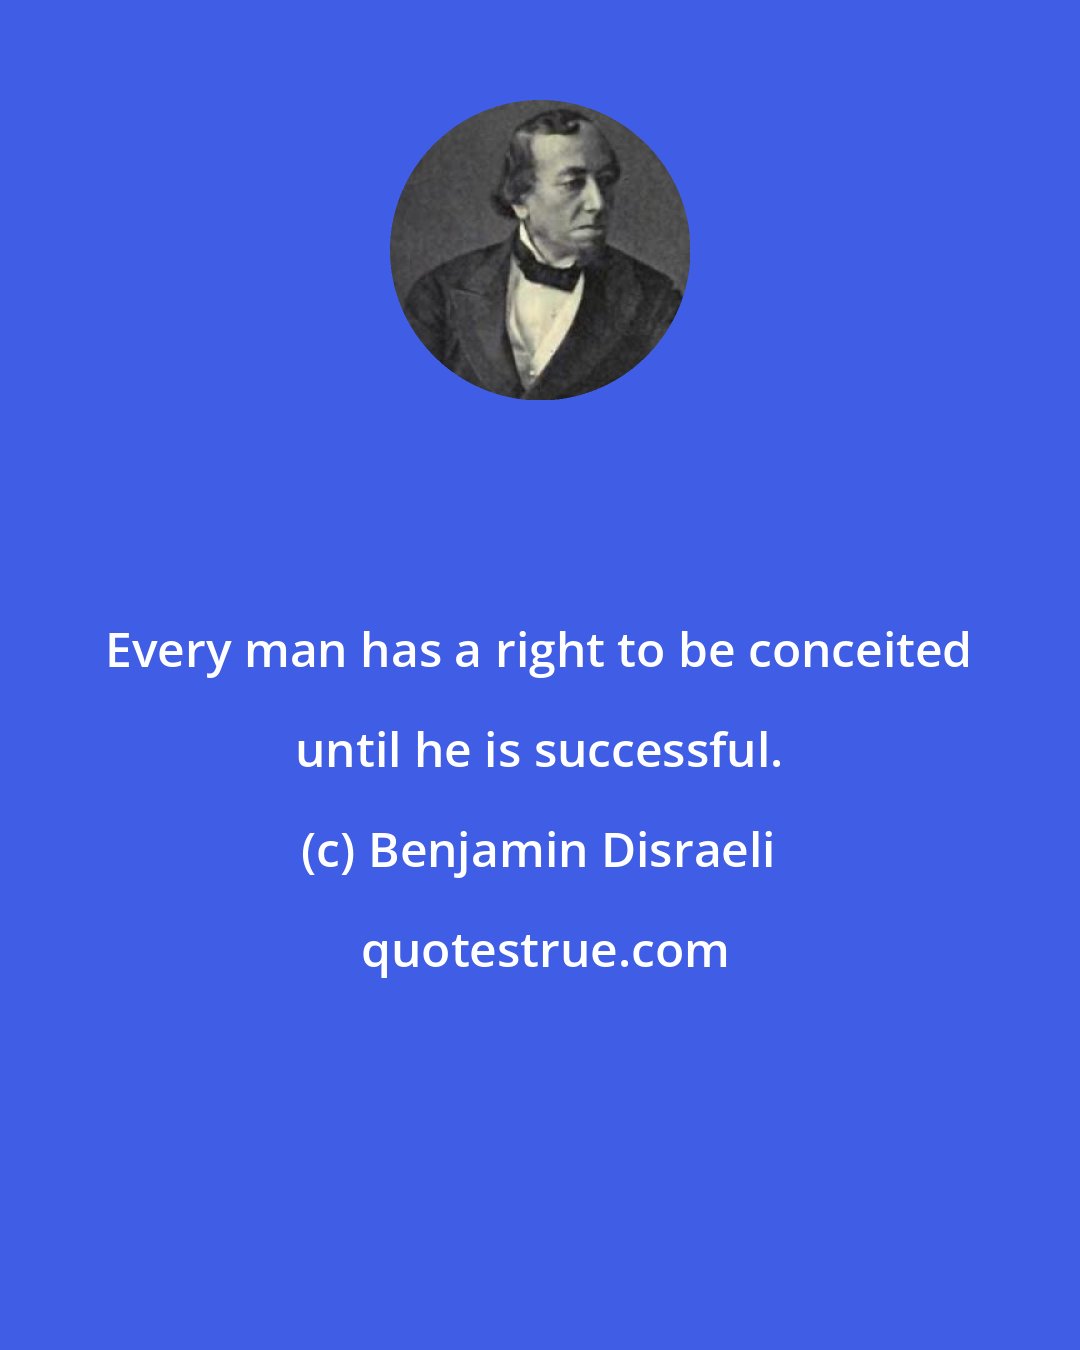 Benjamin Disraeli: Every man has a right to be conceited until he is successful.